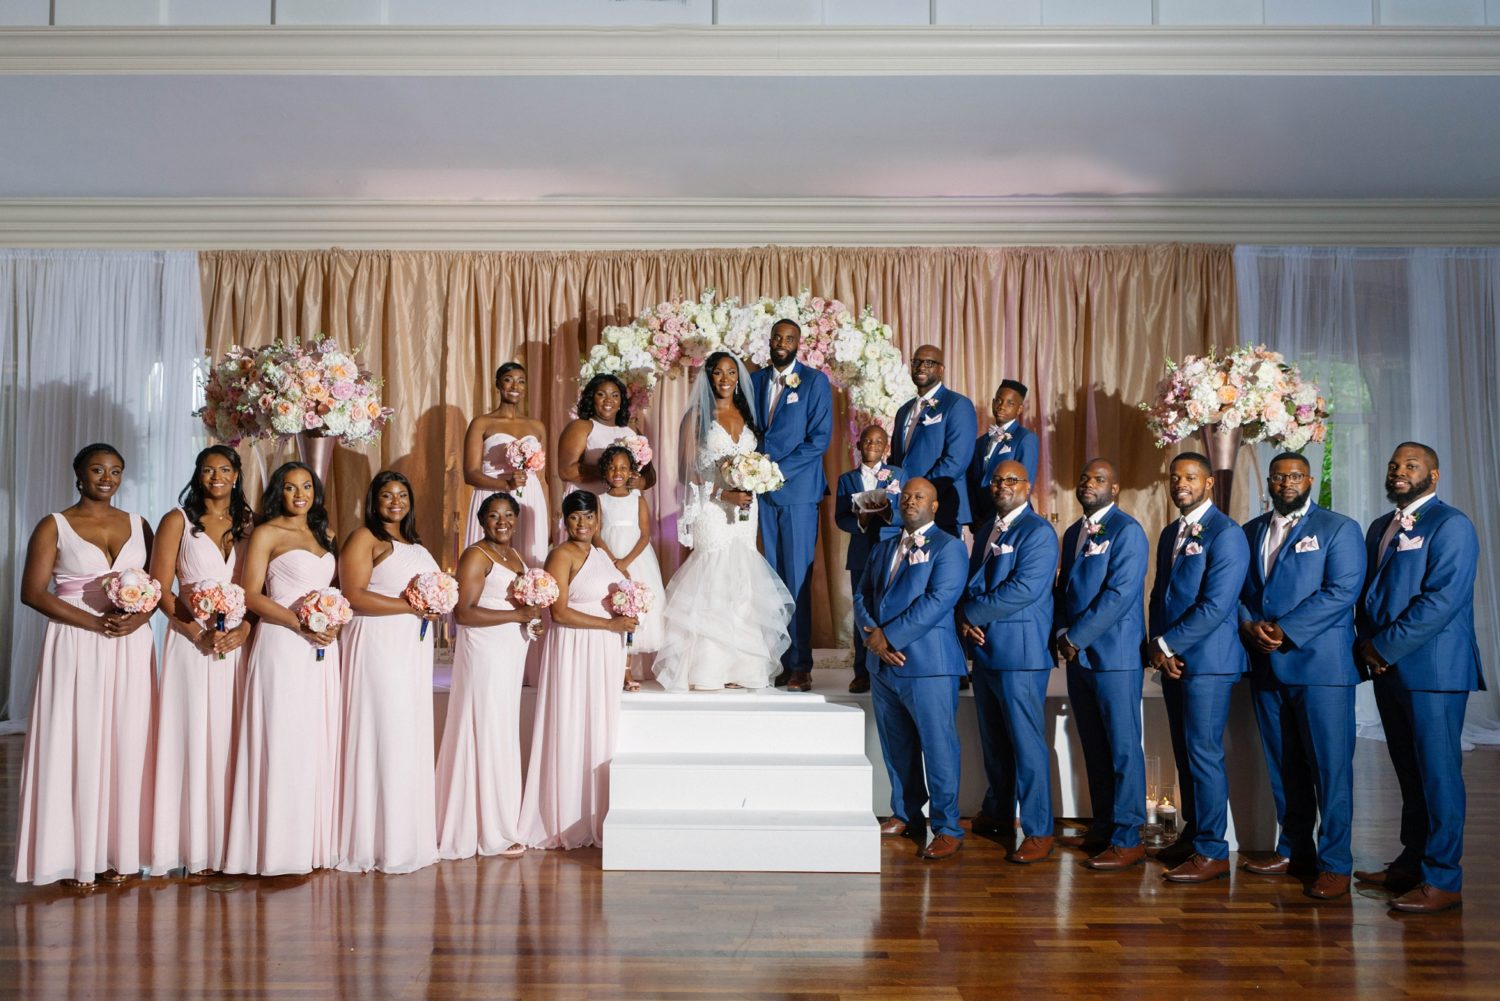 Large Bridal Party wedding photo inside the Magnolia Room in Rock Hill, South Carolina | Photo by Samantha Clarke